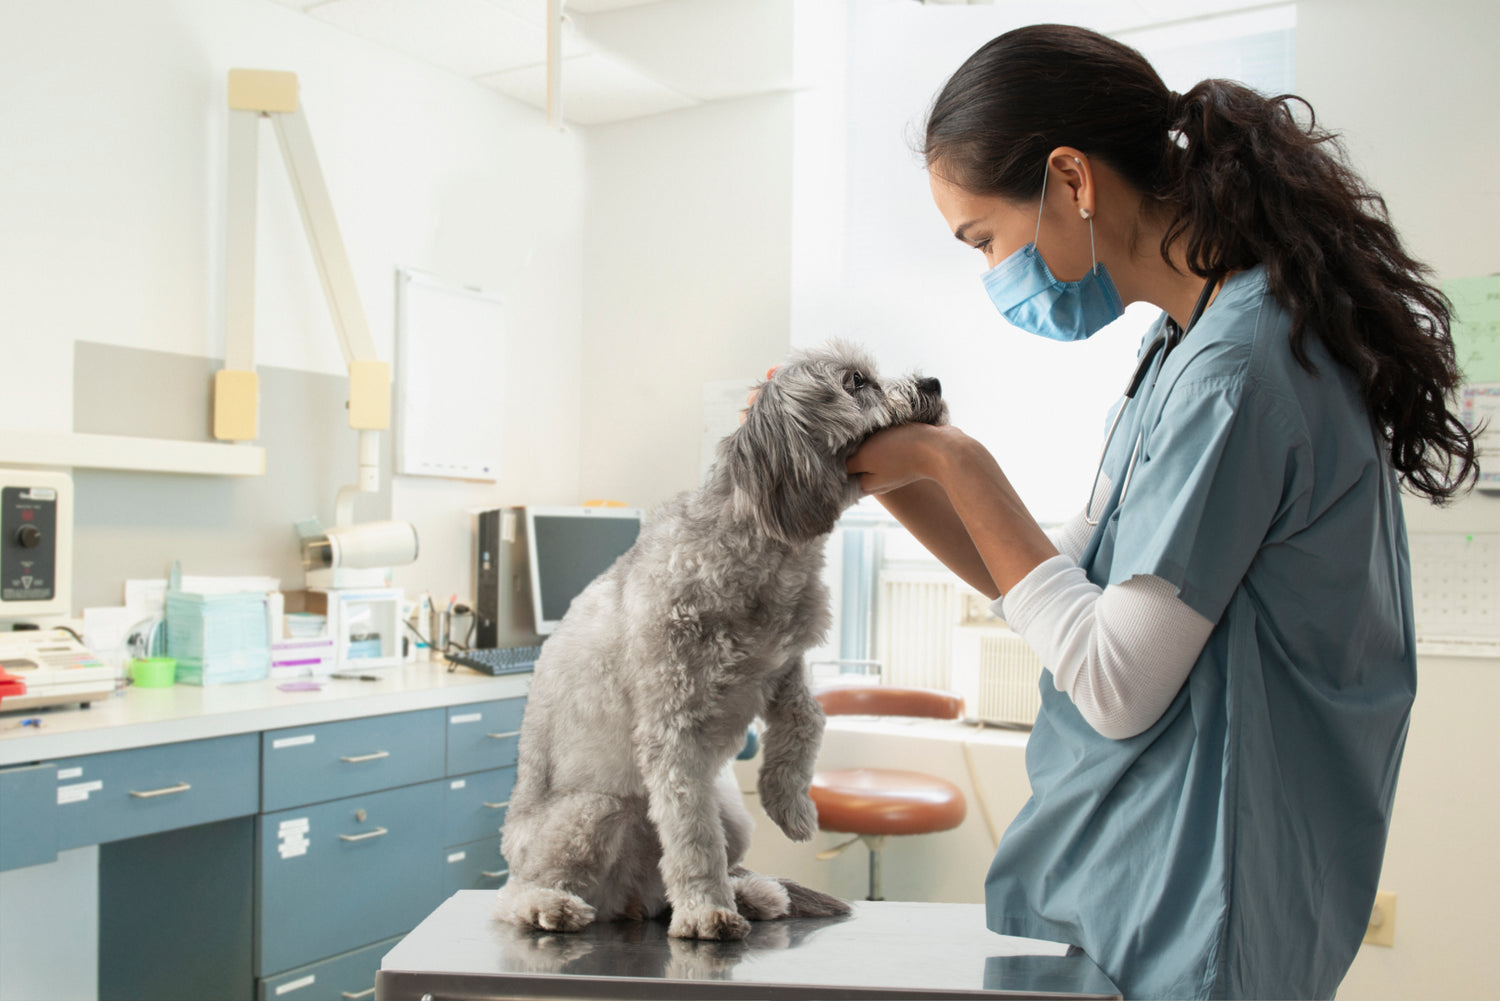 10 reasons to start a career in animal care